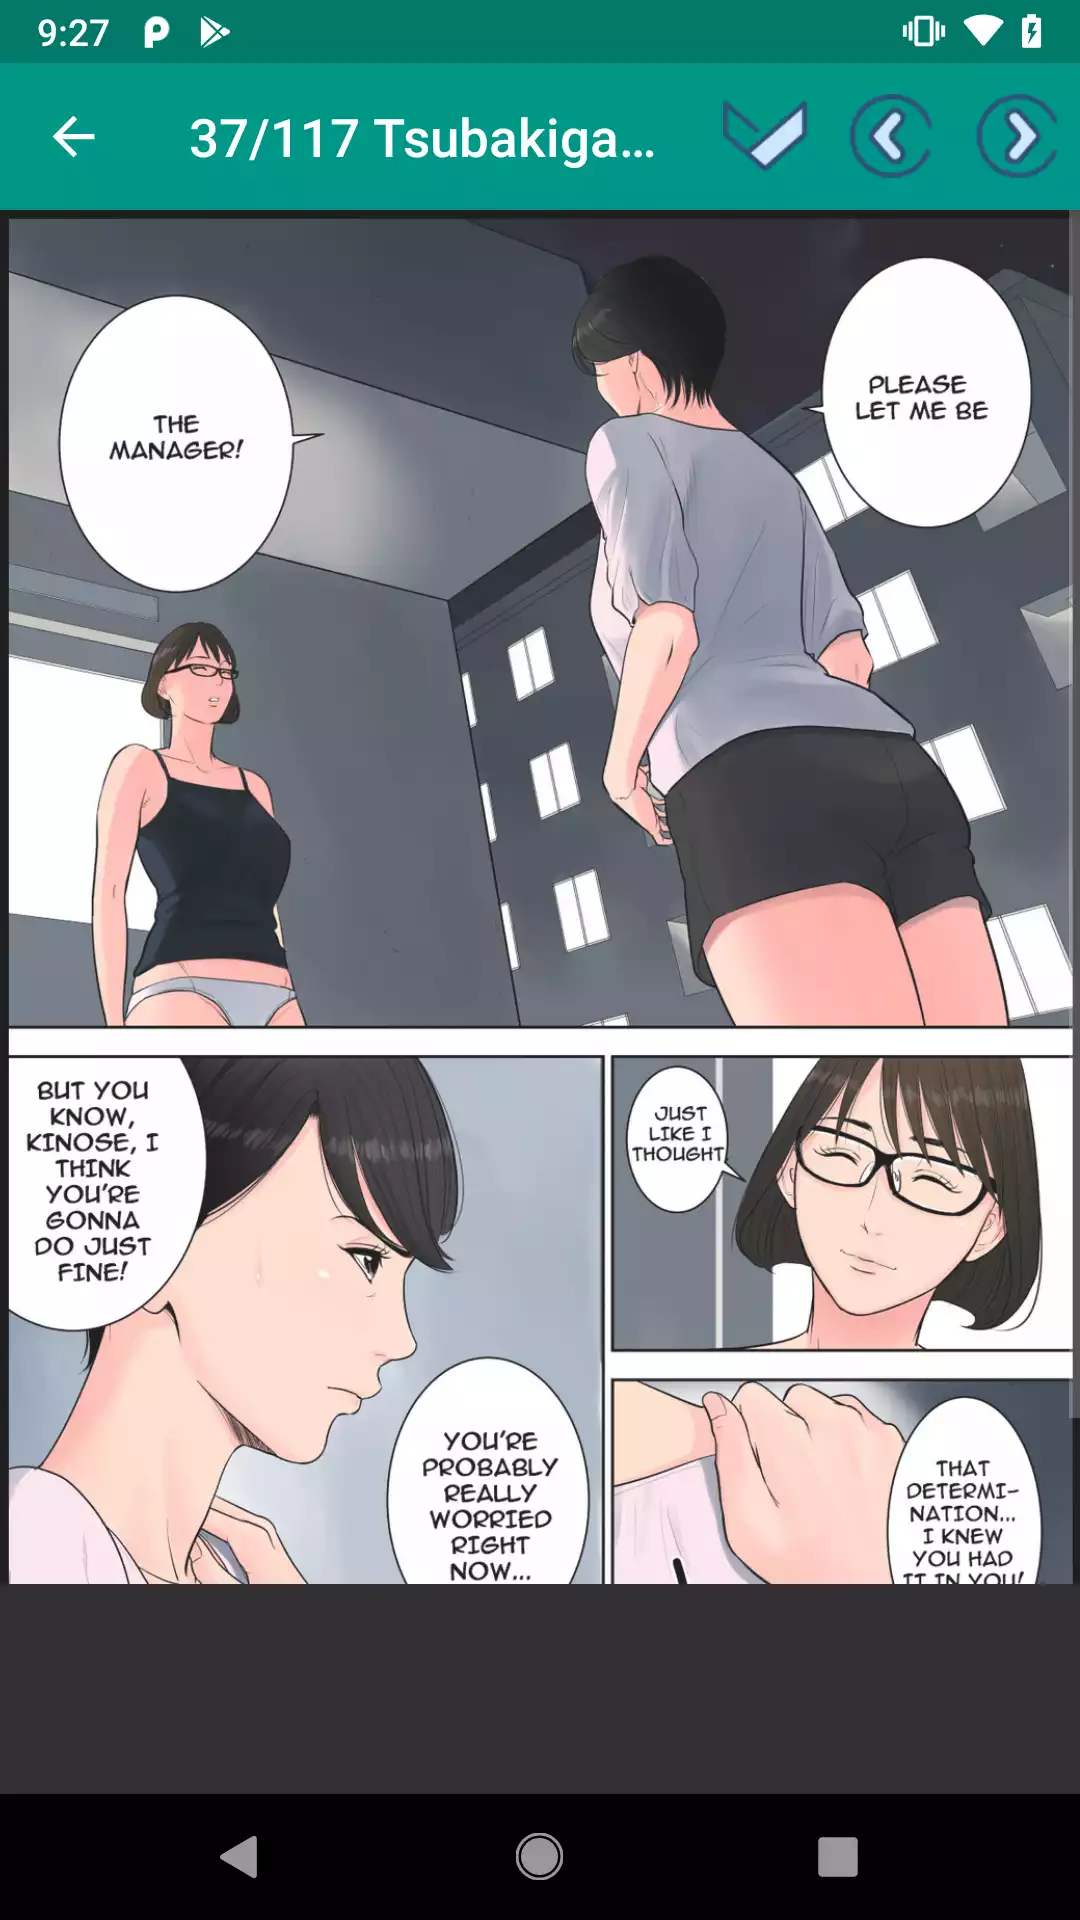 Tsubakigaoka Danchi no Kanrinin android,pegging,pics,hentia,collection,apk,gallerie,hot,wallpaper,apks,sexy,downloads,shemales,porn,download,comics,apps,hentai,app,for,manga,gallery